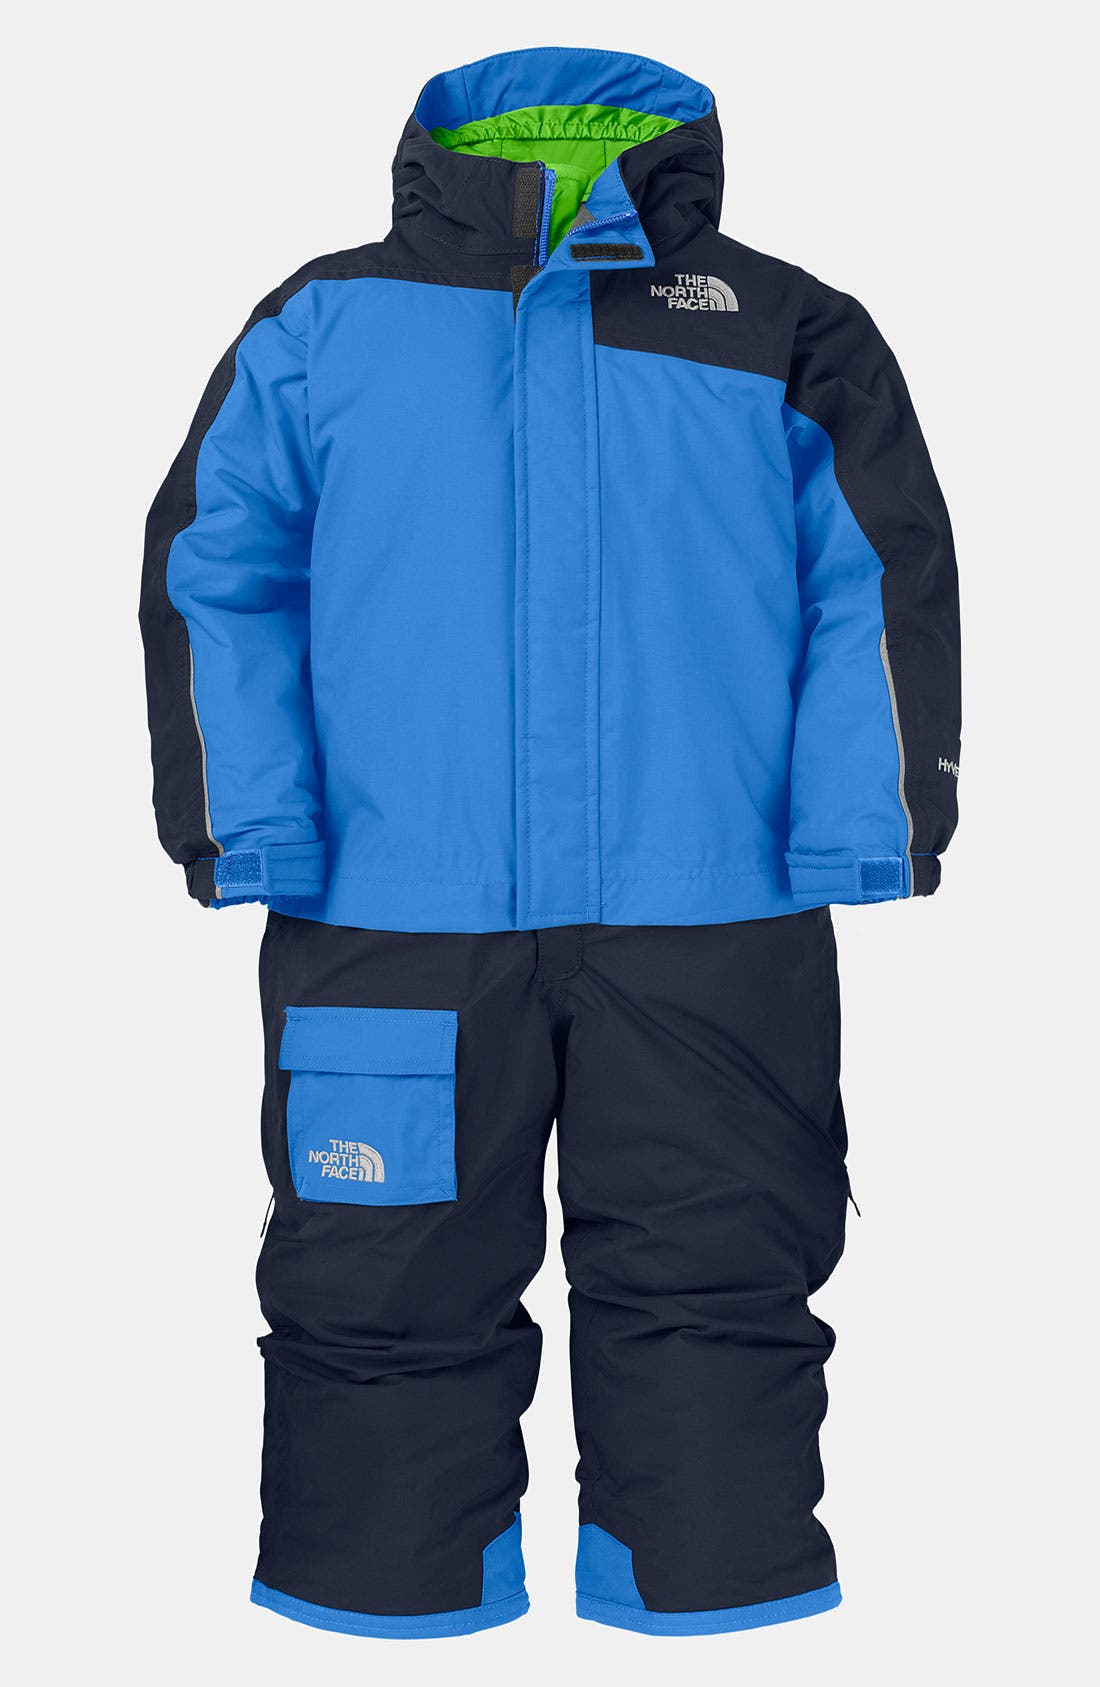 baby girl snowsuit north face